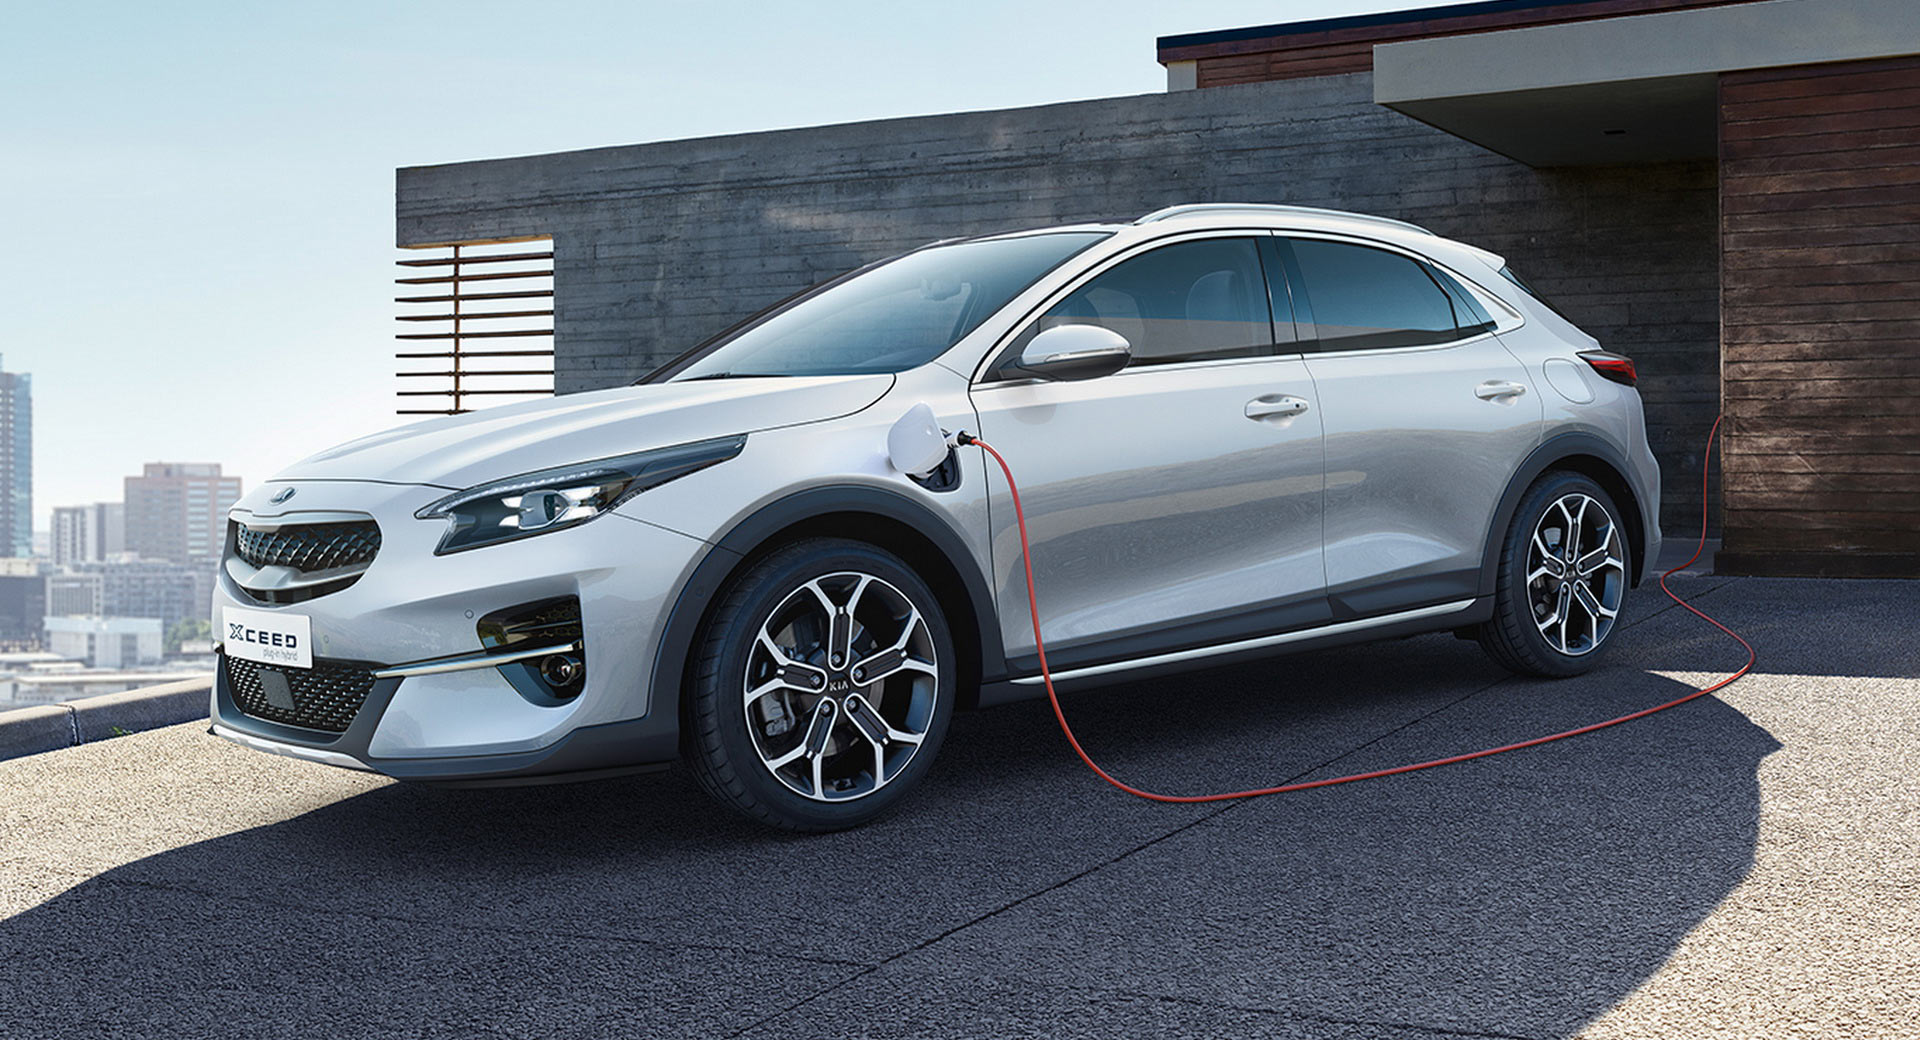 Kia Reveals New Plug-In Hybrid Versions Of XCeed and Ceed Sportswagon